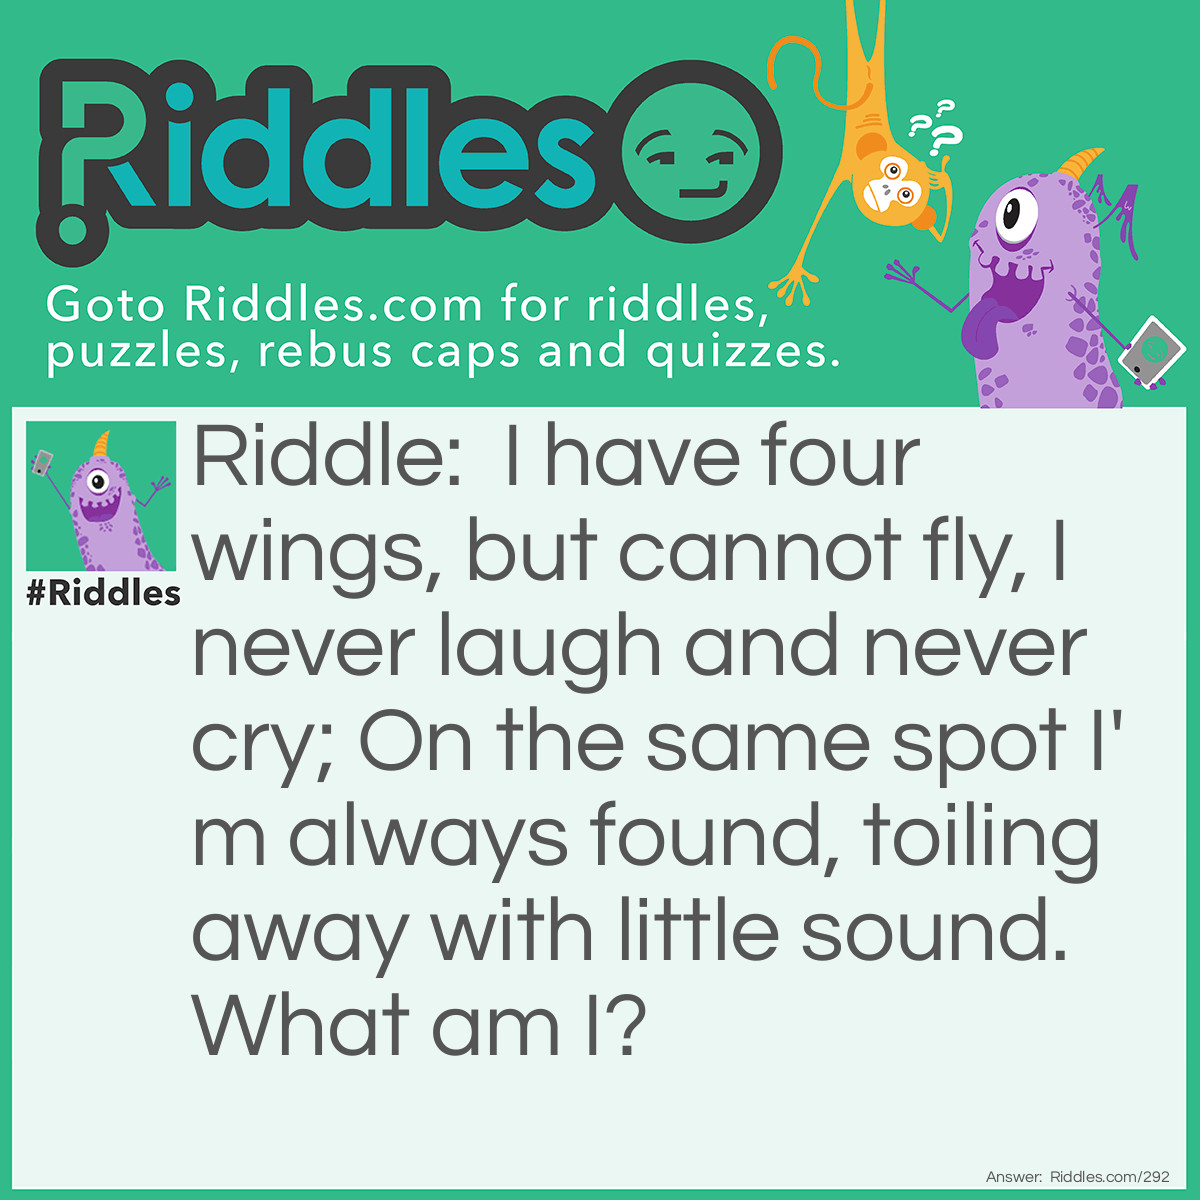 Riddle: I have four wings, but cannot fly, I never <a title="laugh" href="../../../funny-riddles">laugh</a> and never cry; On the same spot, I'm always found, toiling away with little sound. What am I? Answer: A Windmill.